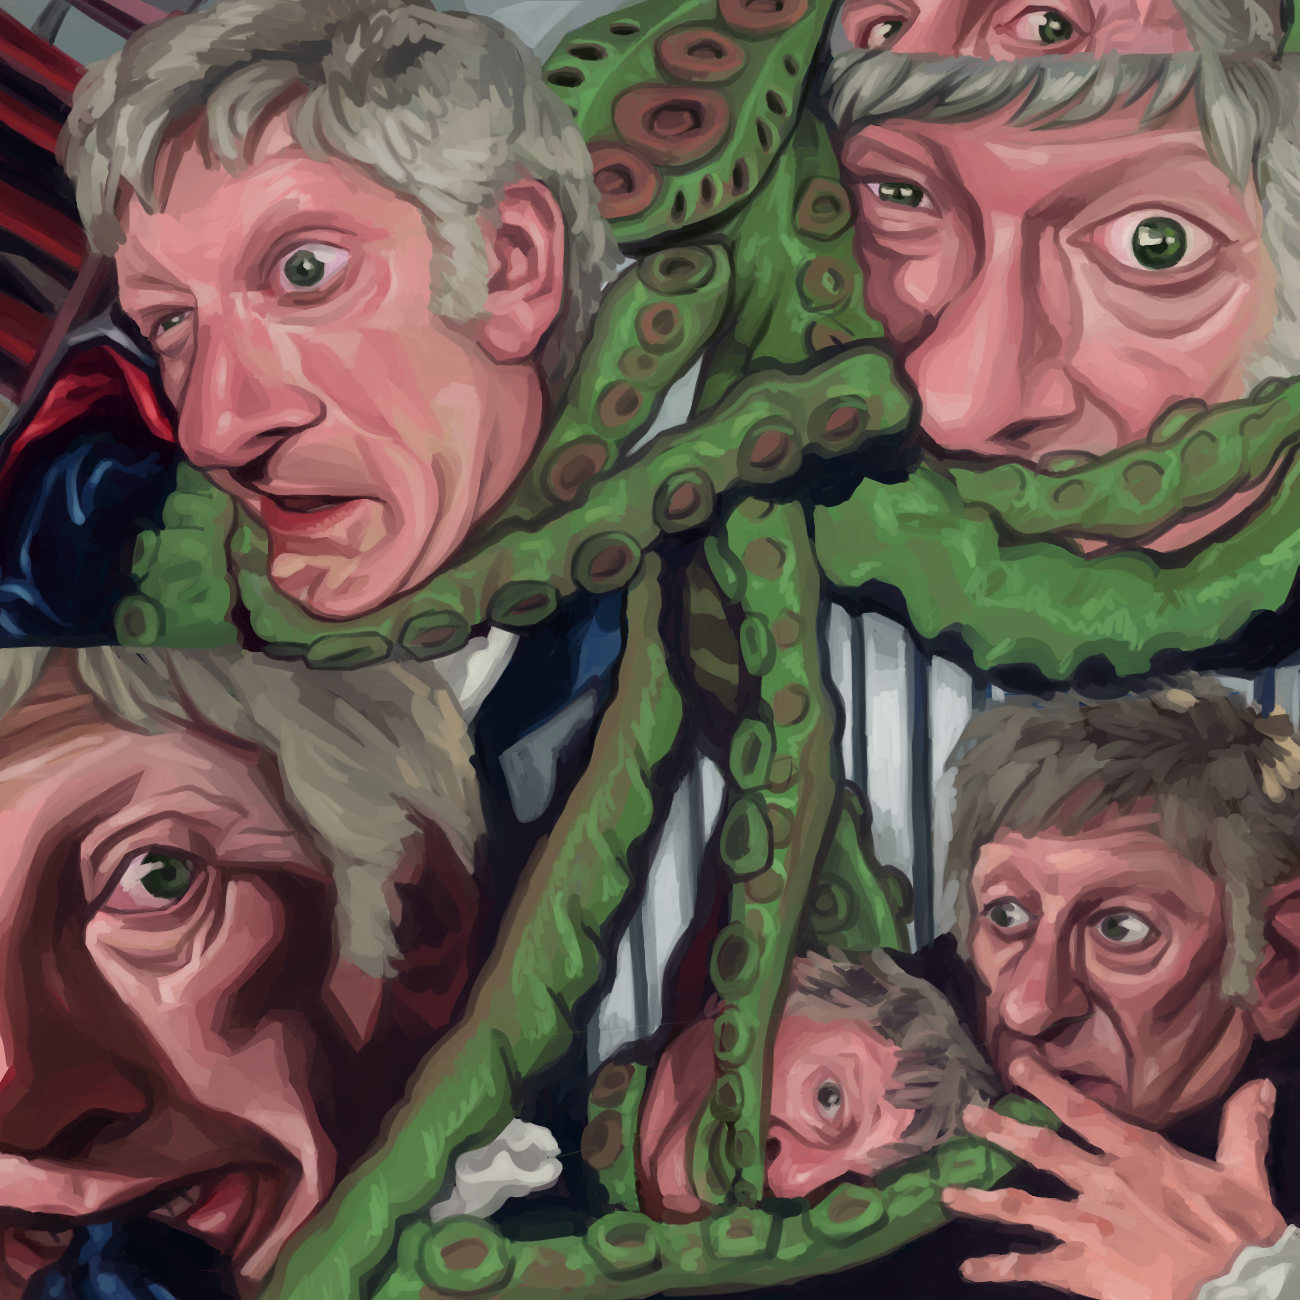 Digital painting of a collage of screenshots from the episode 'Spearhead in Space'. It shows the third doctor being strangled by tentacles in various ways.